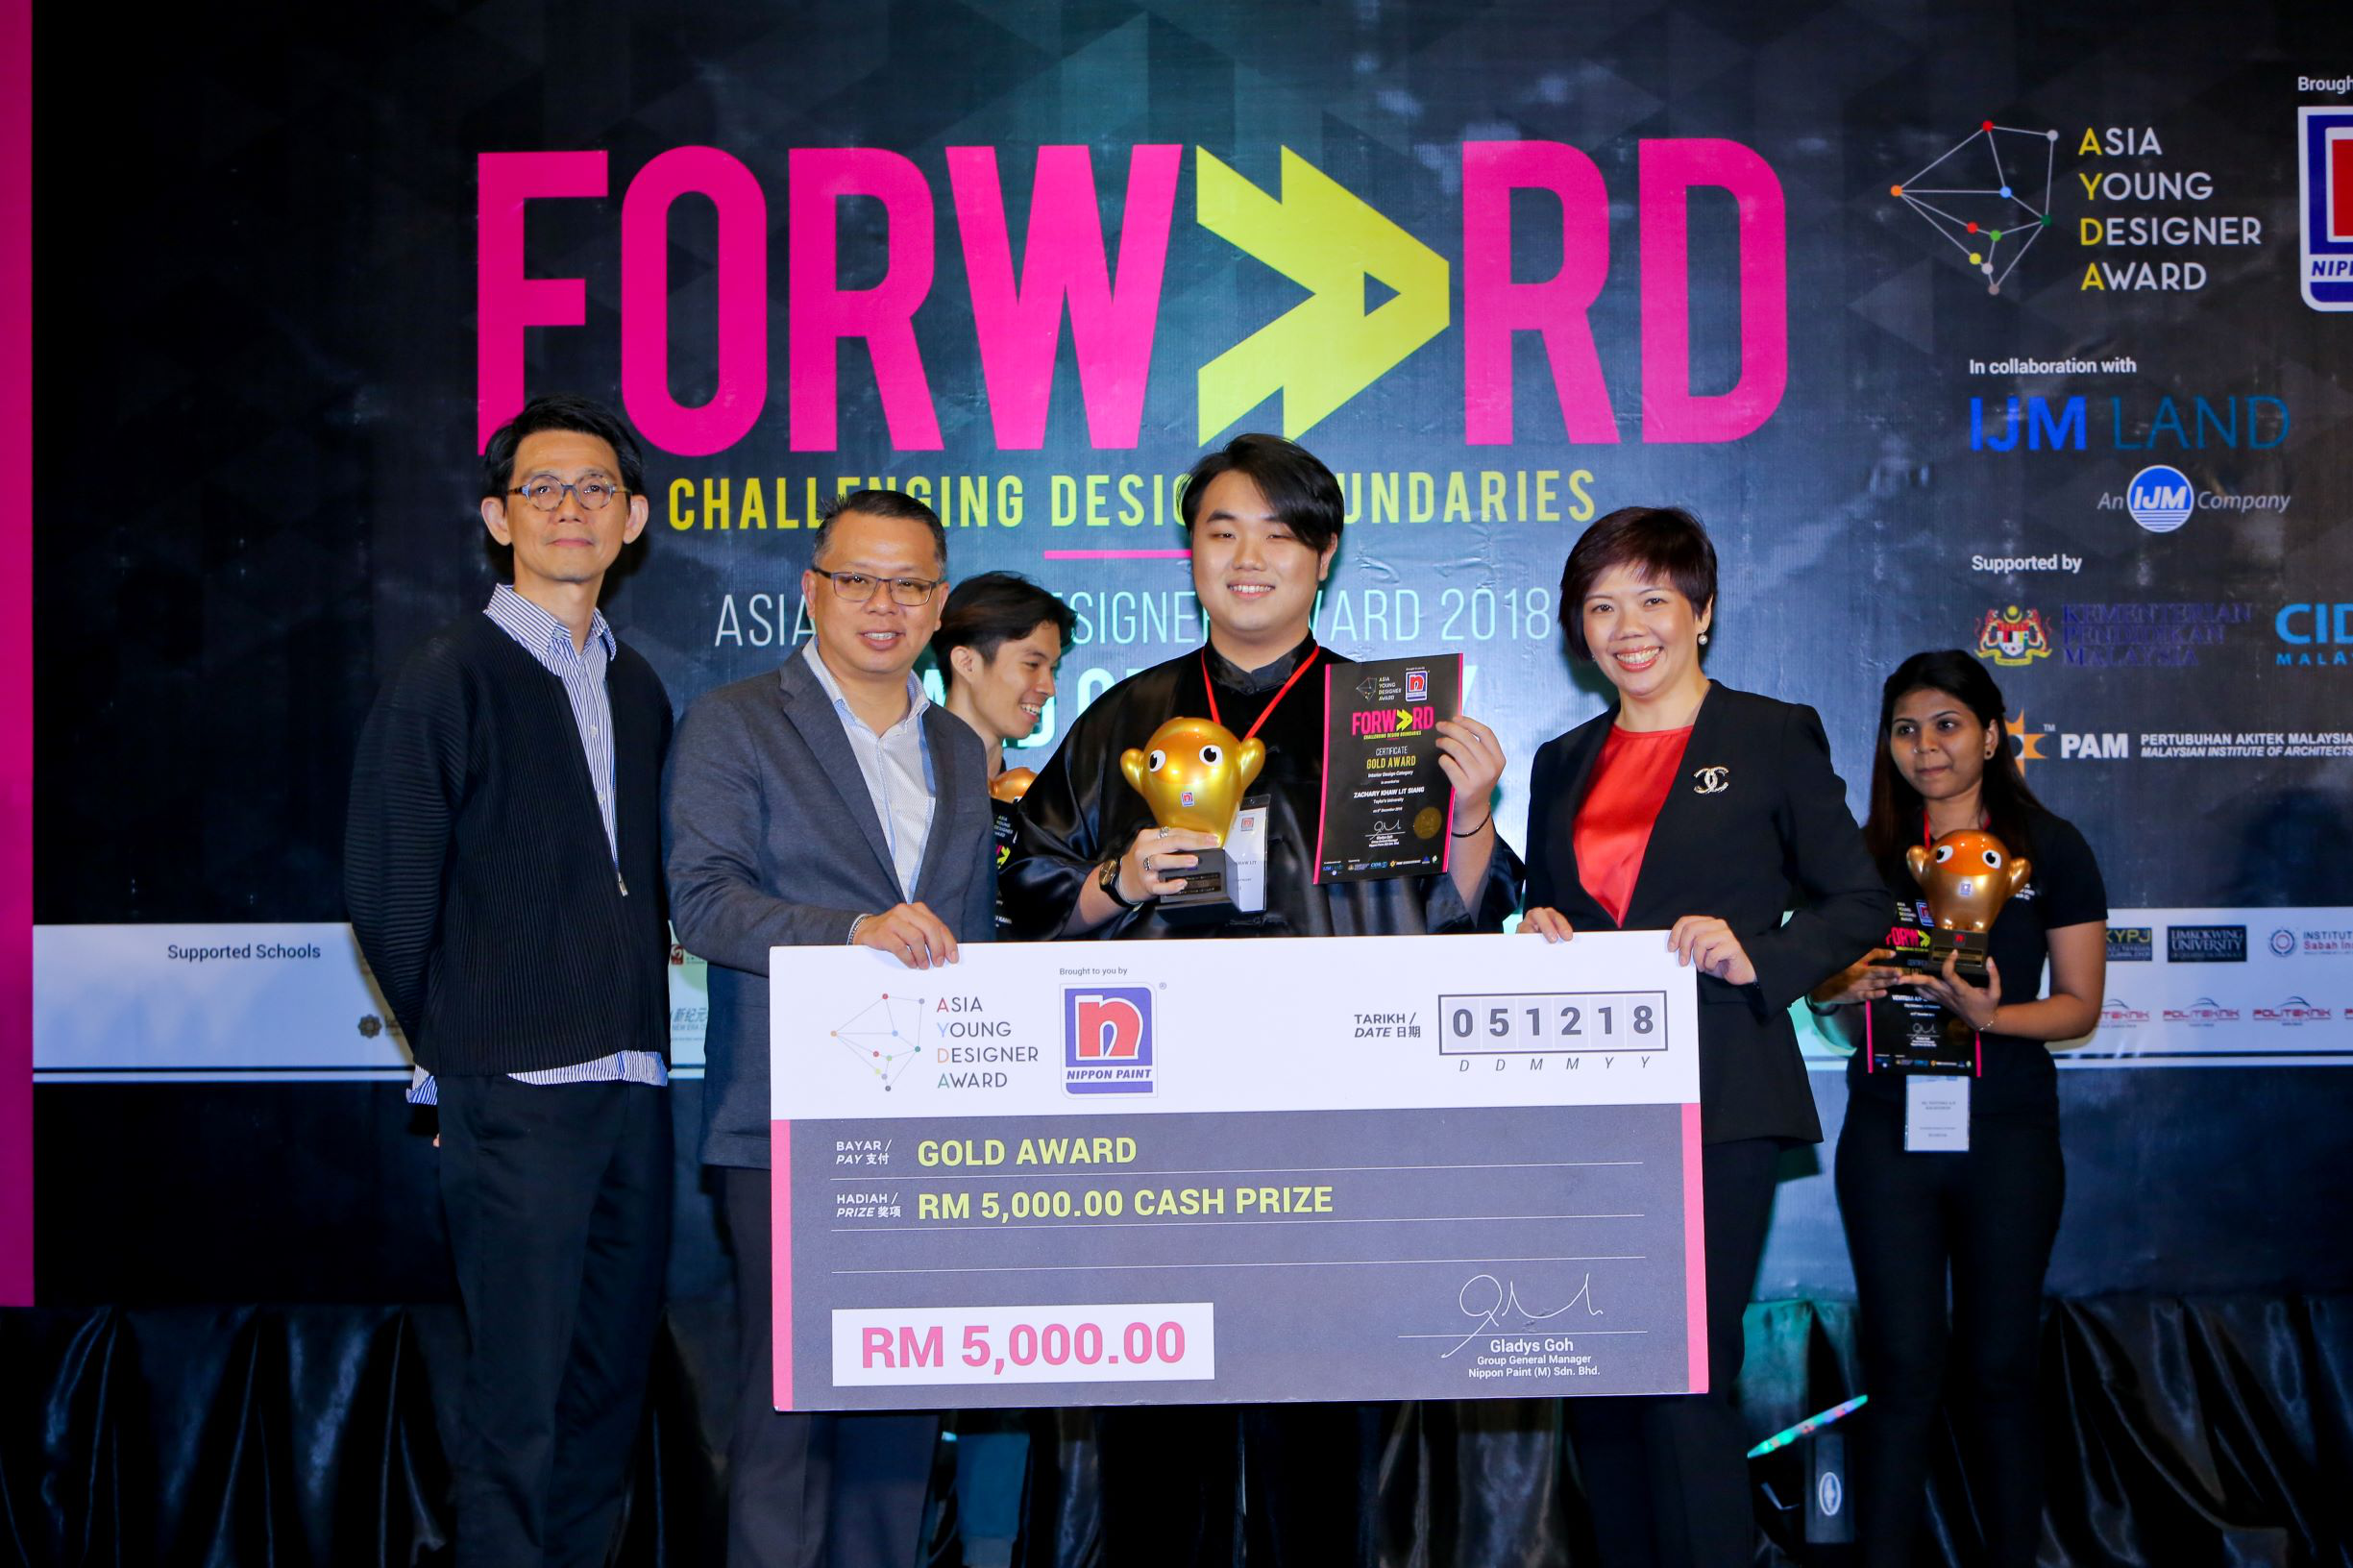 Zachary Khaw from The Design School won Asia Young Designer Award